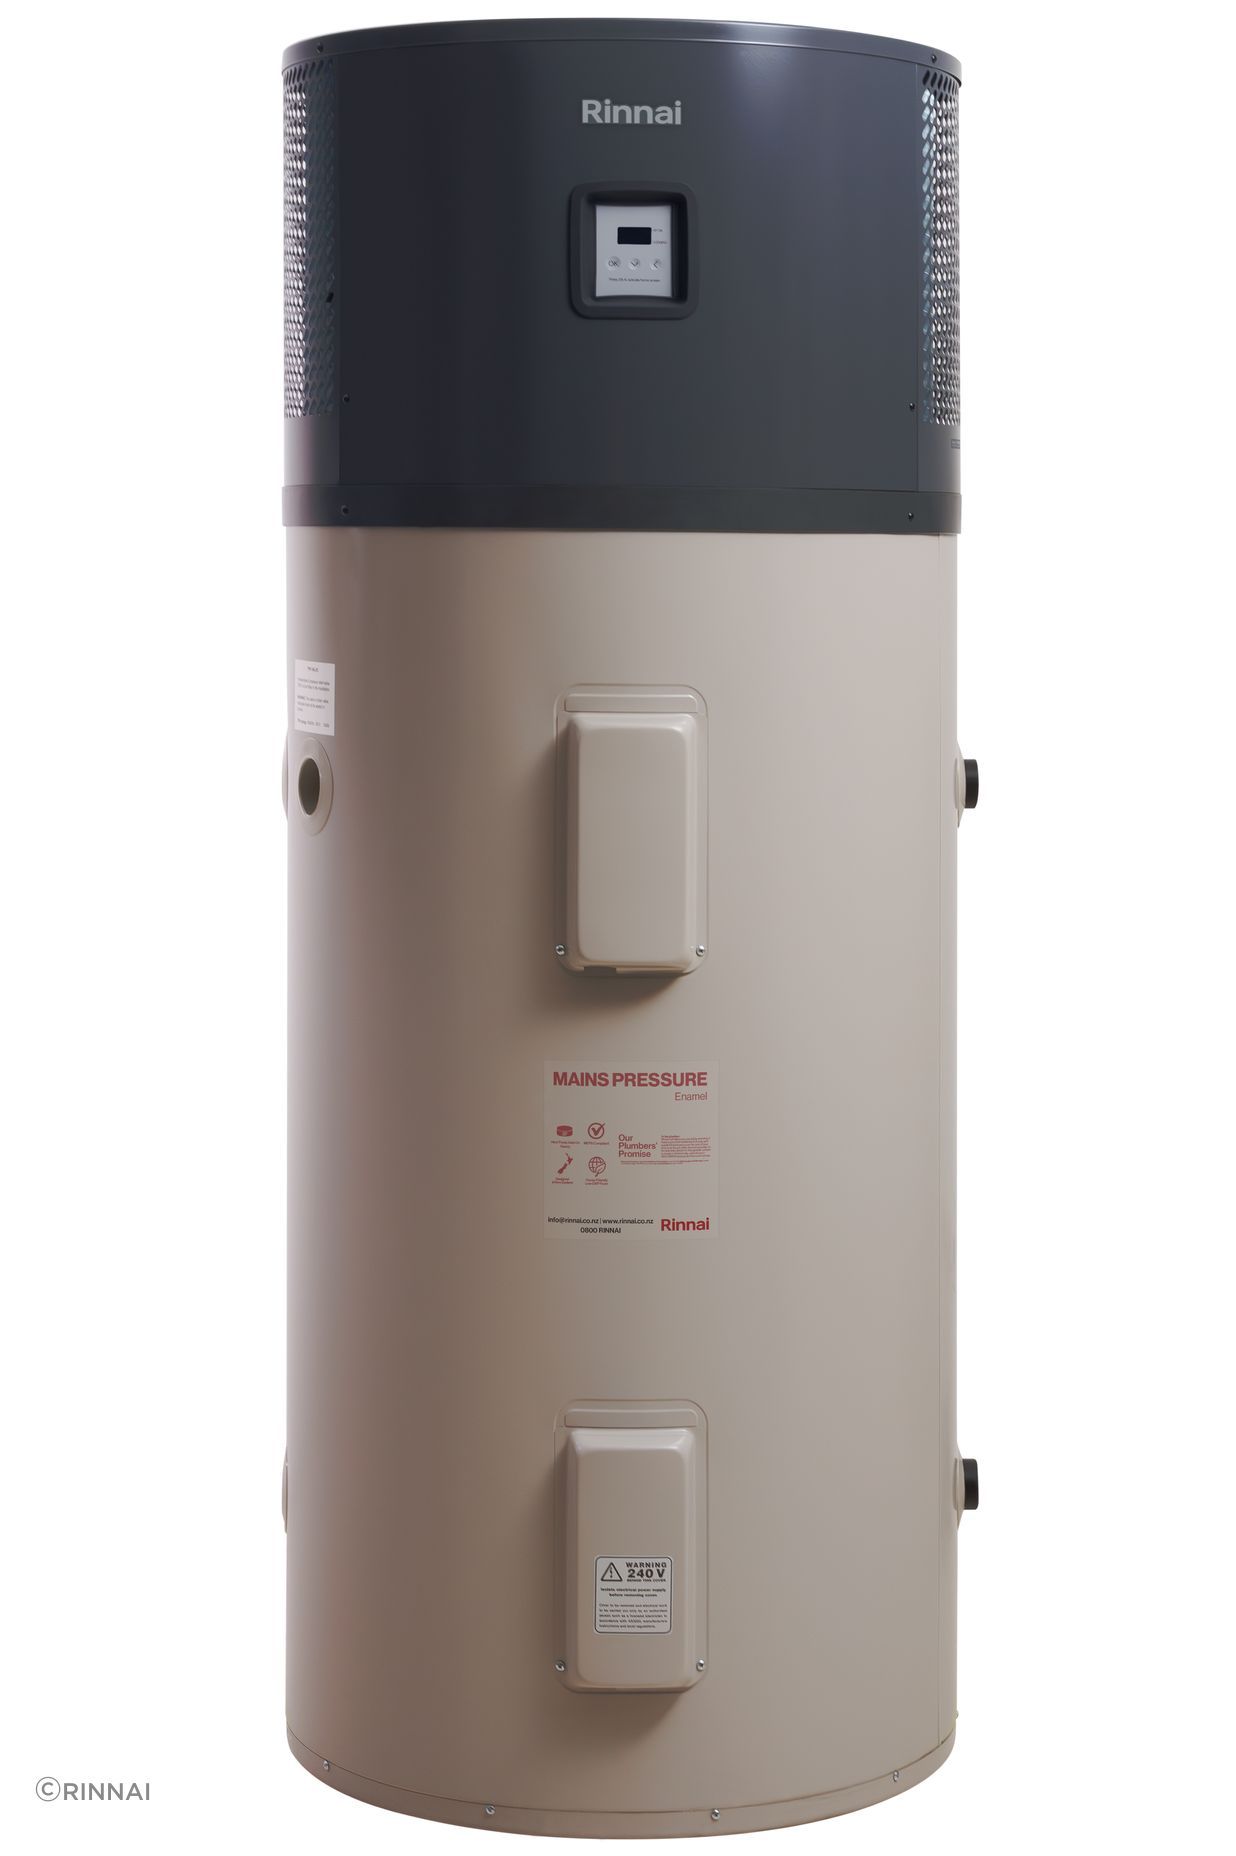 The HydraHeat uses less energy than conventional hot water cylinders to heat the same amount of water.